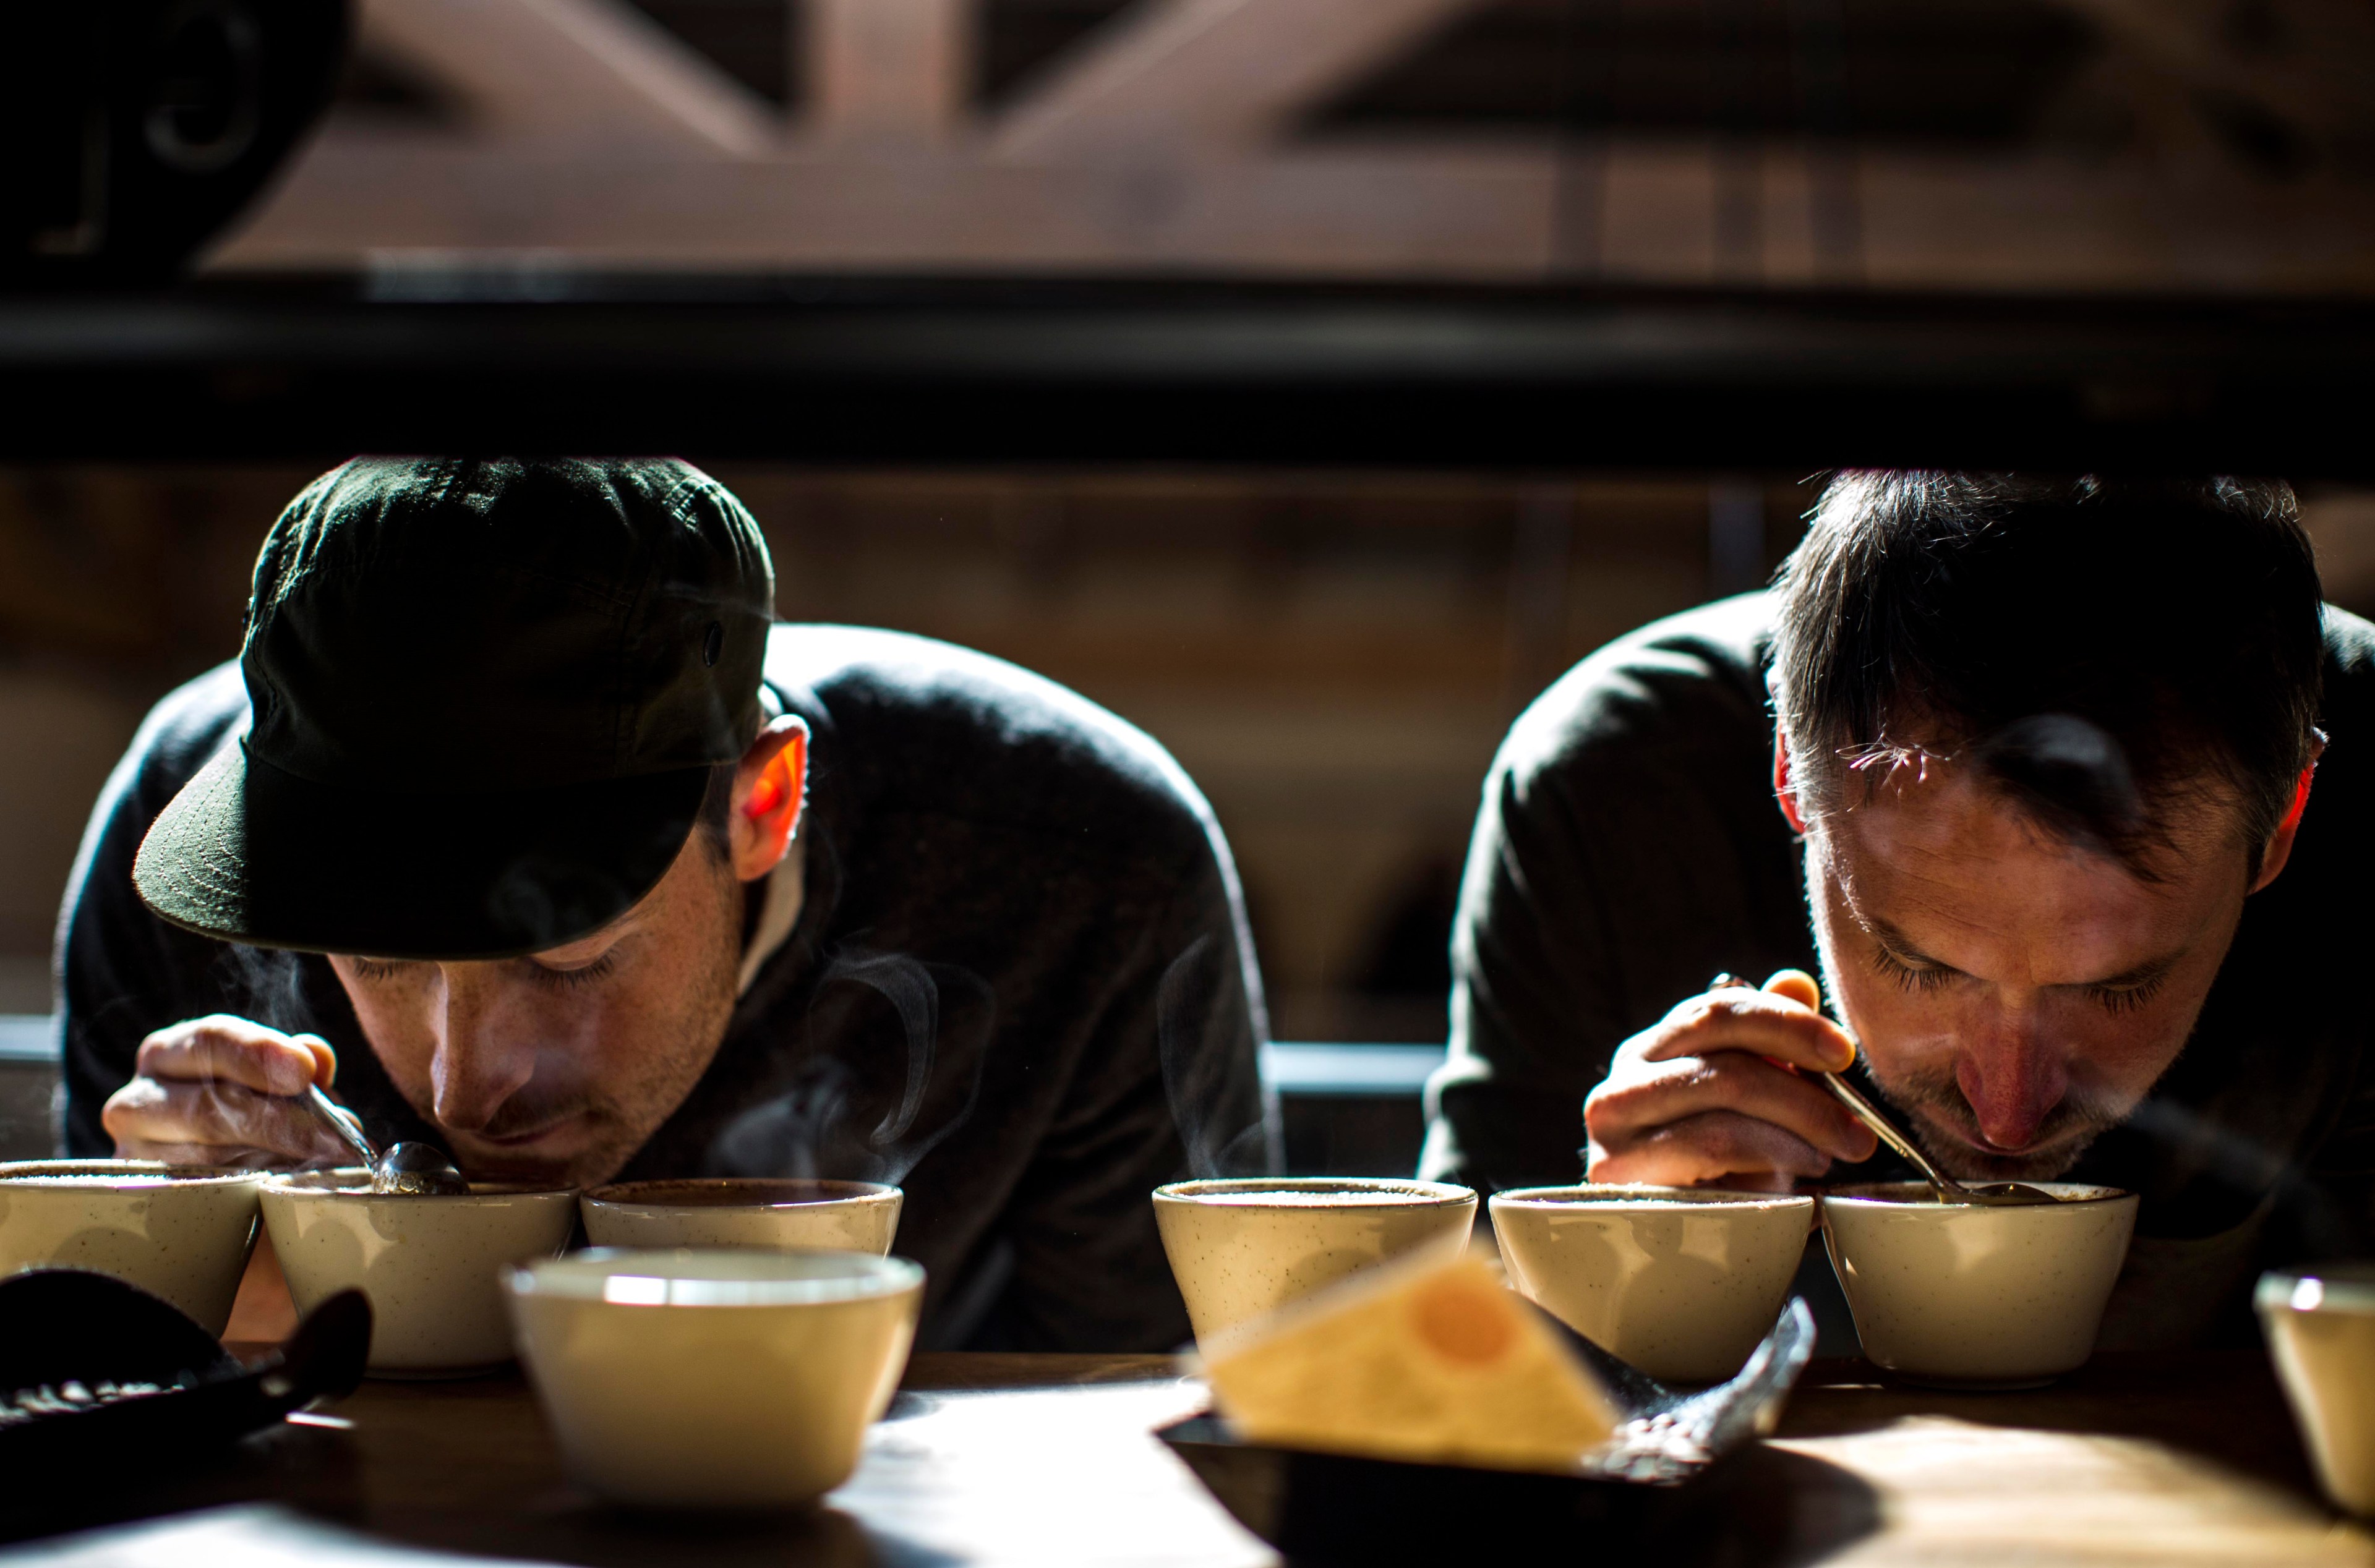 Two men (Justin and Jerad Morrison, the founders of Sightglass Coffee) lean over cups of coffee.